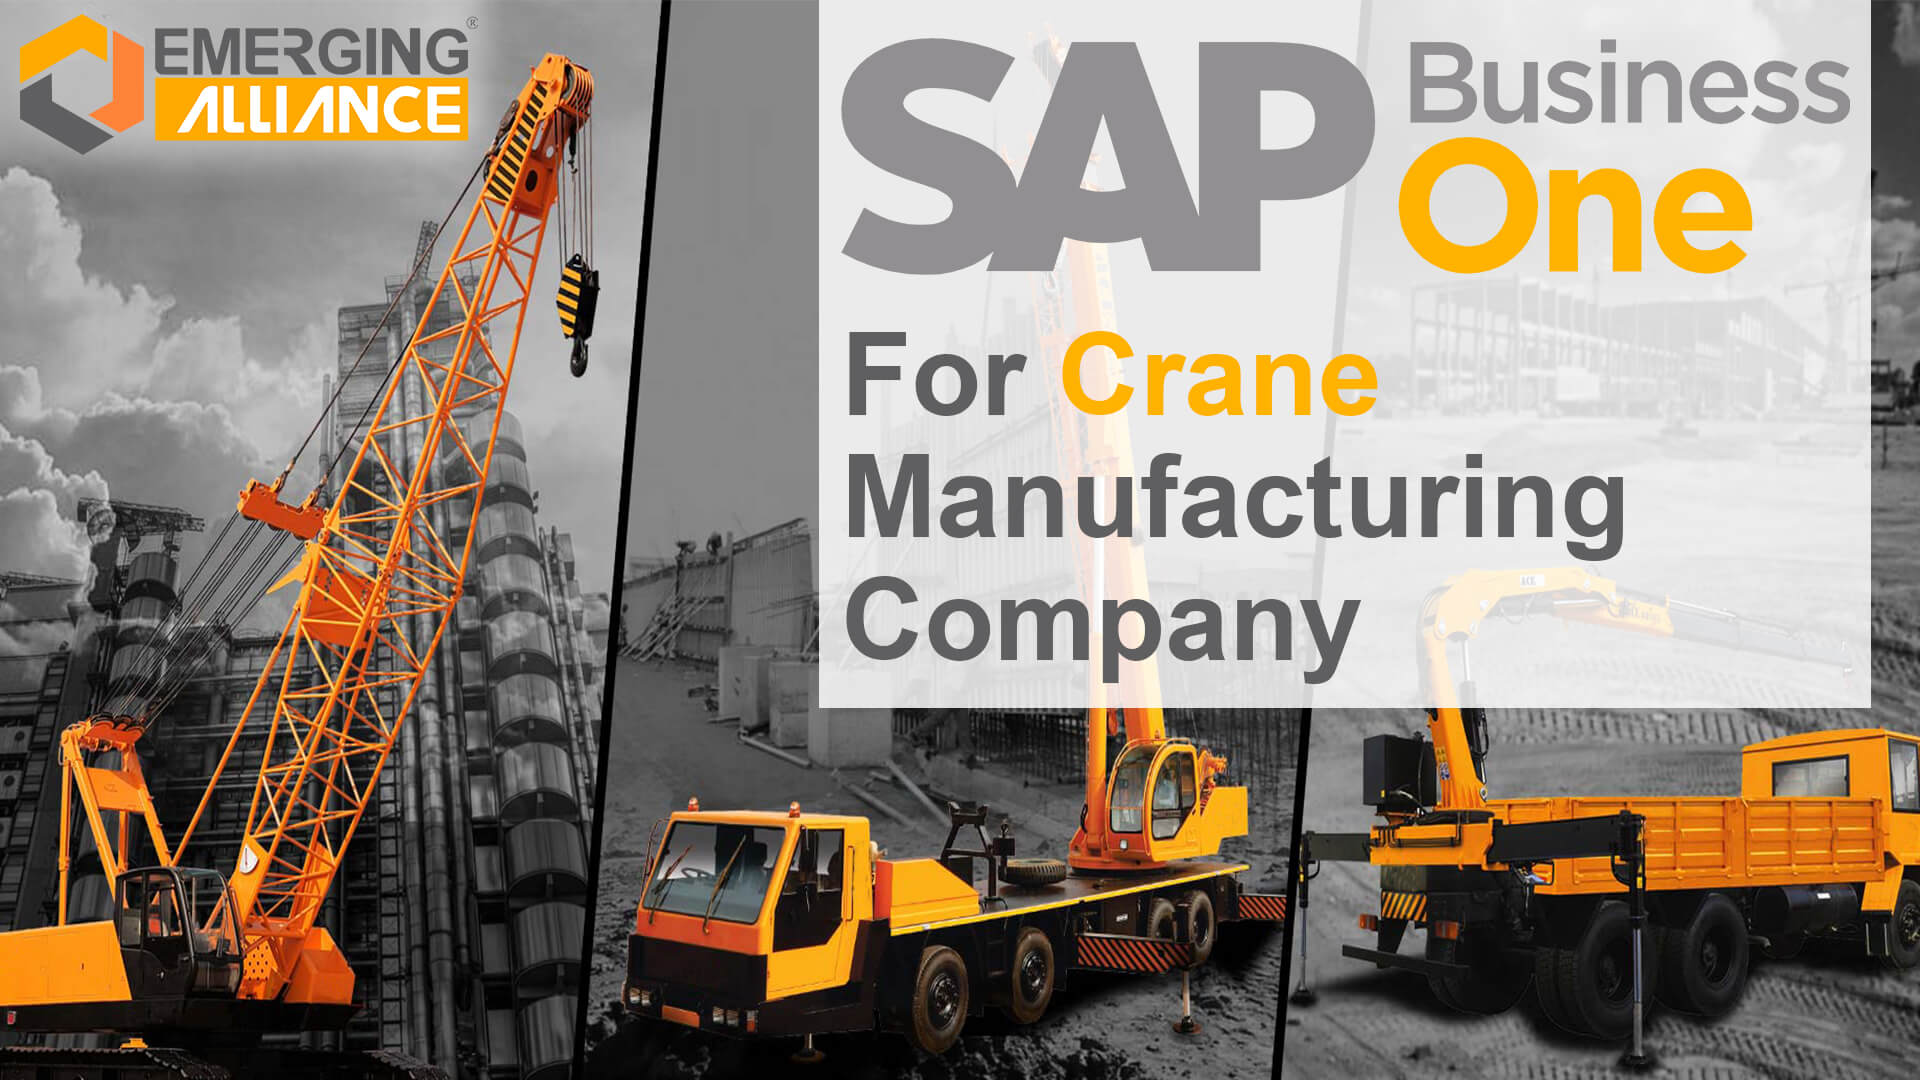 sap business one for crane manufacturing company